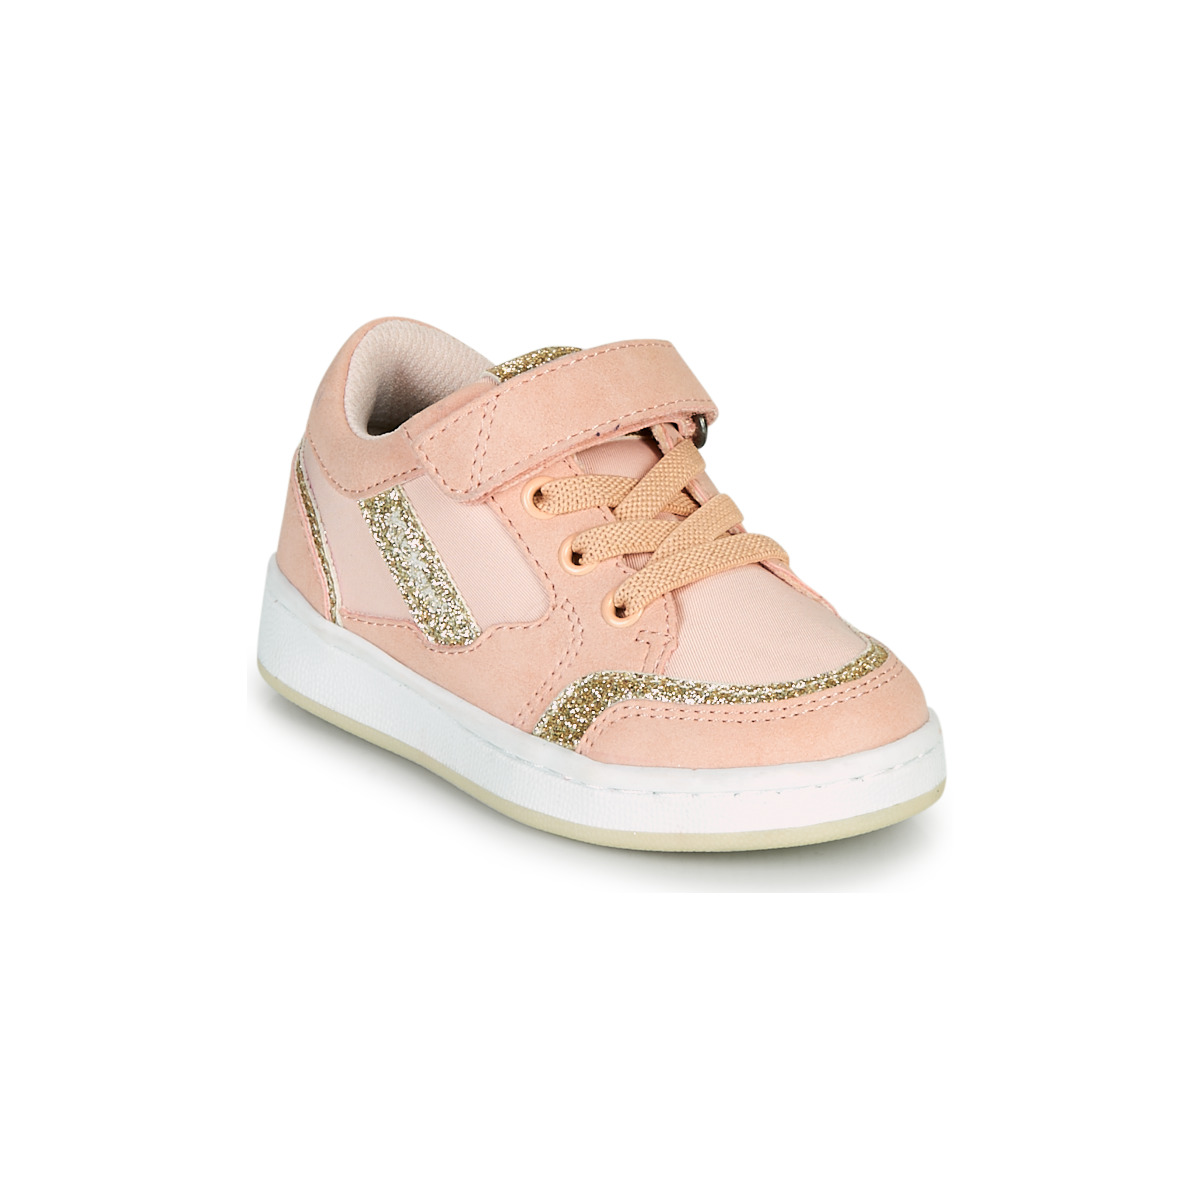 Chaussures Fille Pulls & Gilets BISCKUIT Rose